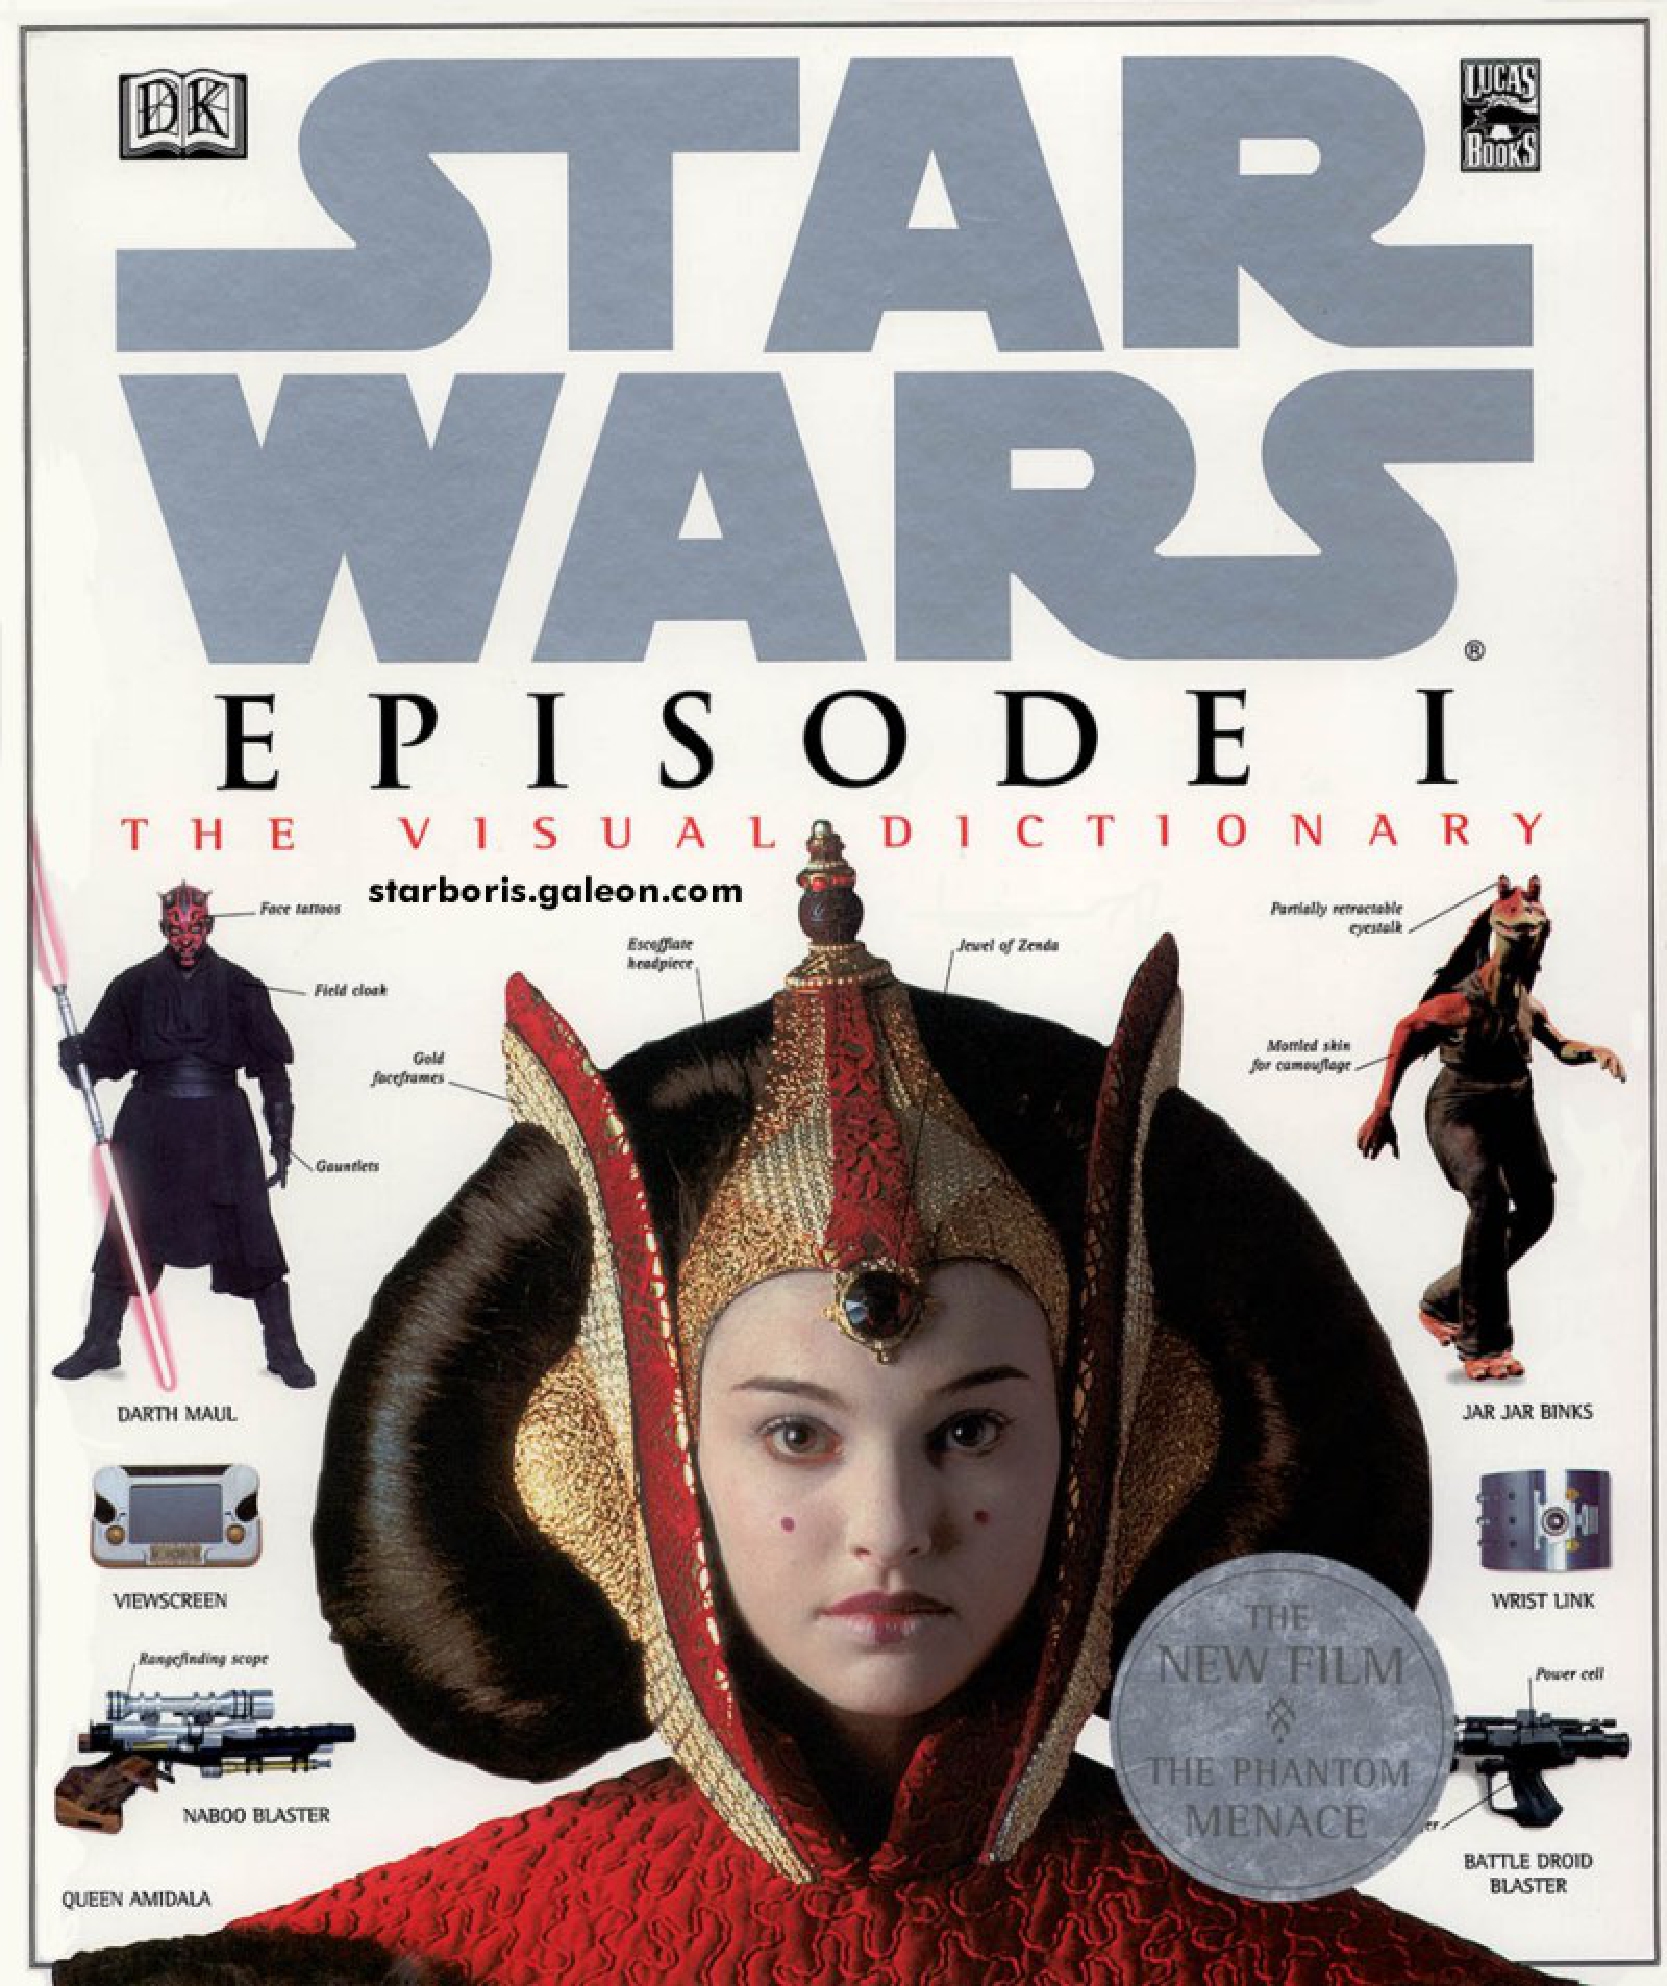 Star Wars: Episode I The Visual Dictionary